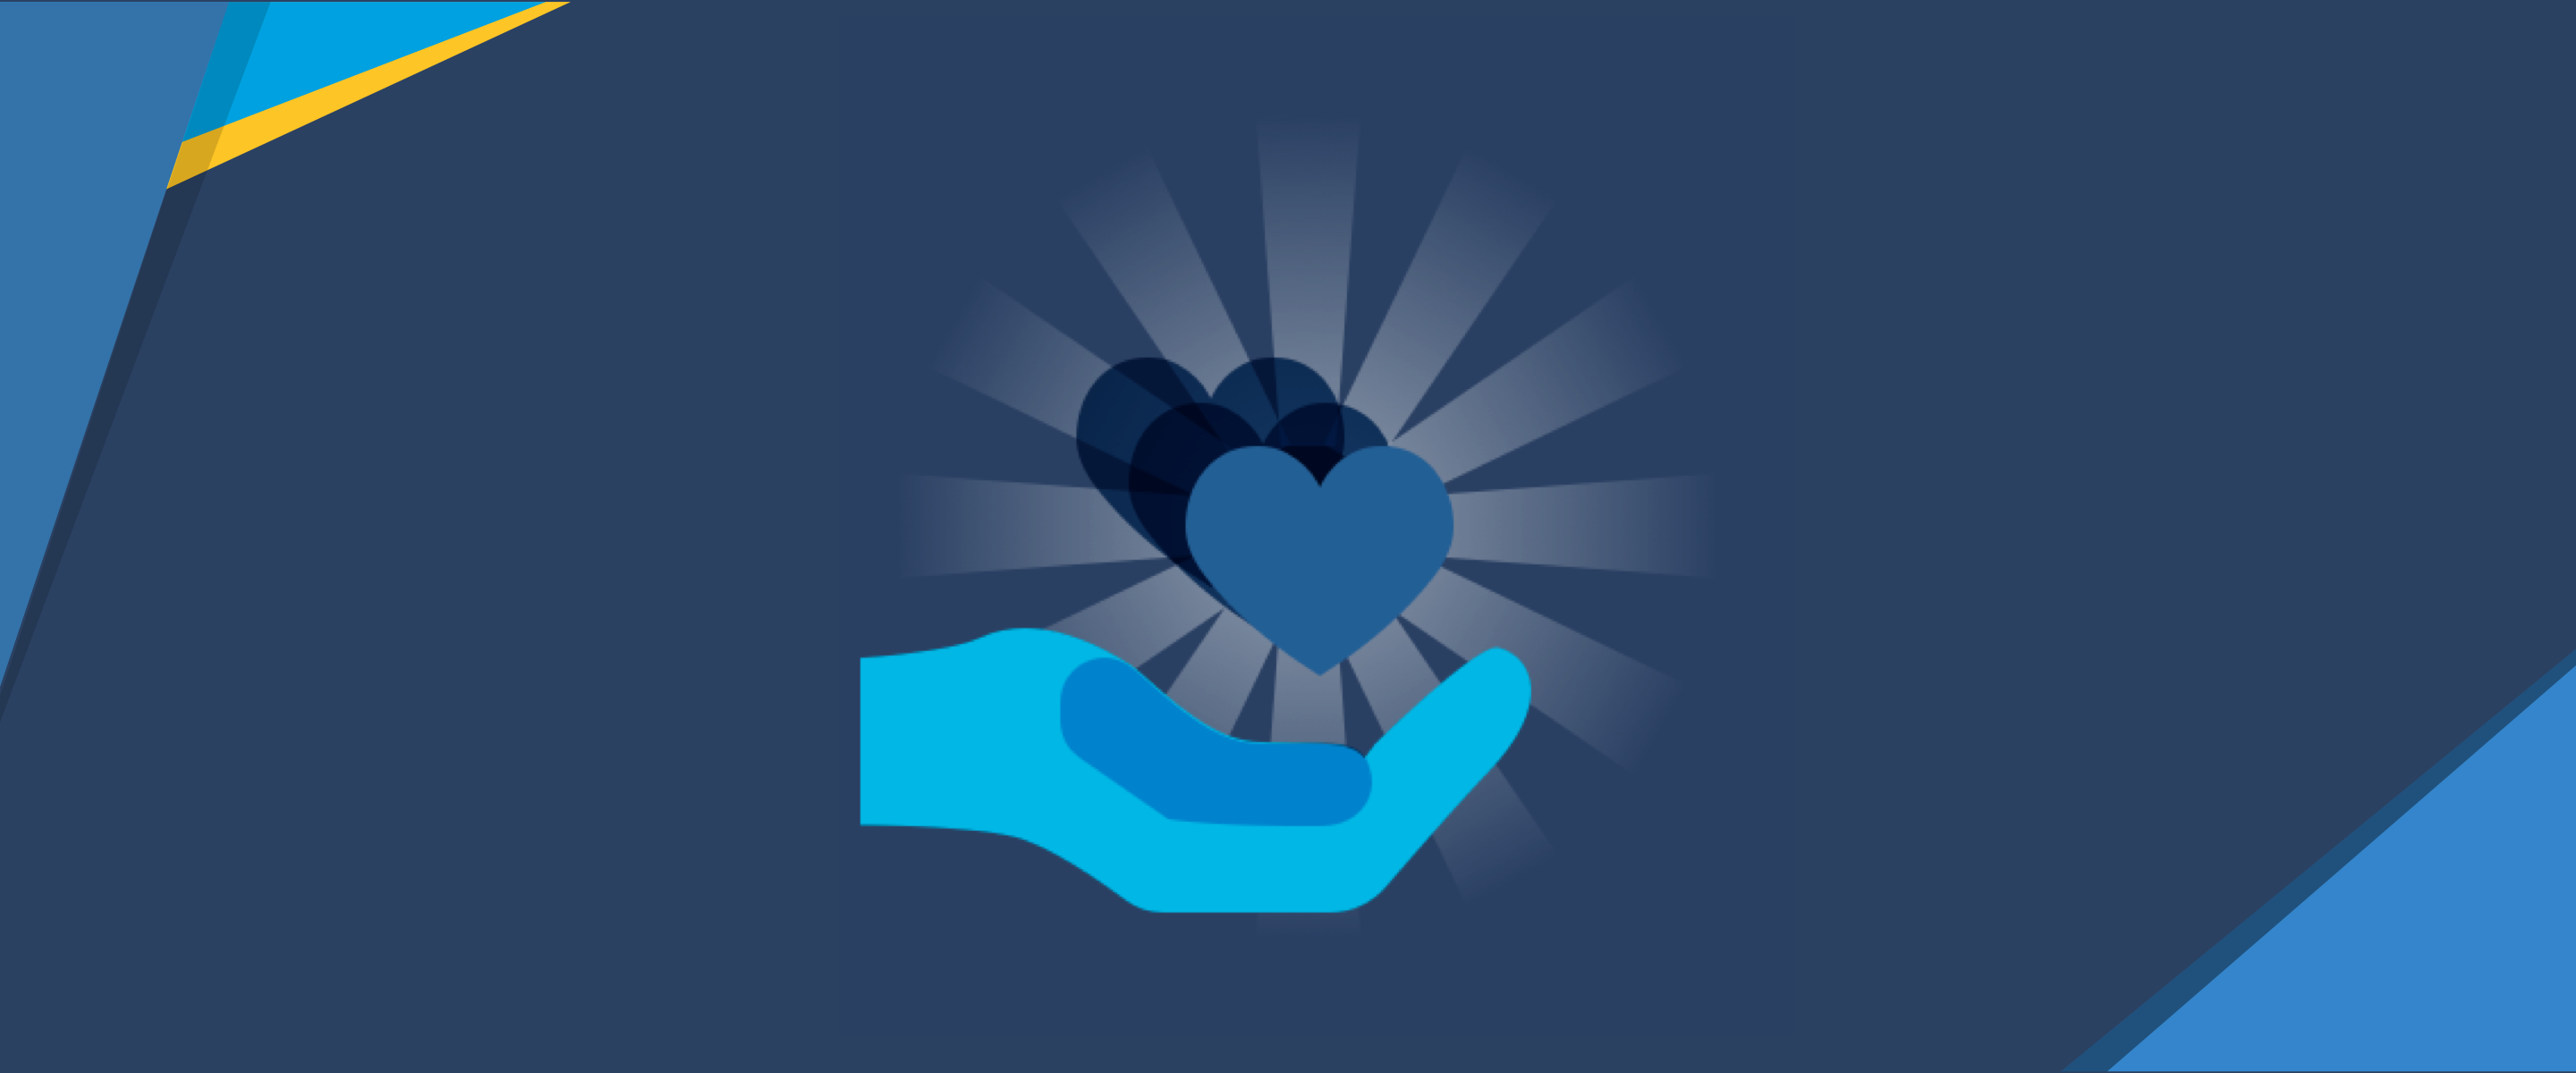 Cartoon open palm with a shining blue heart above it, on a dark navy blue background with origami in the corners